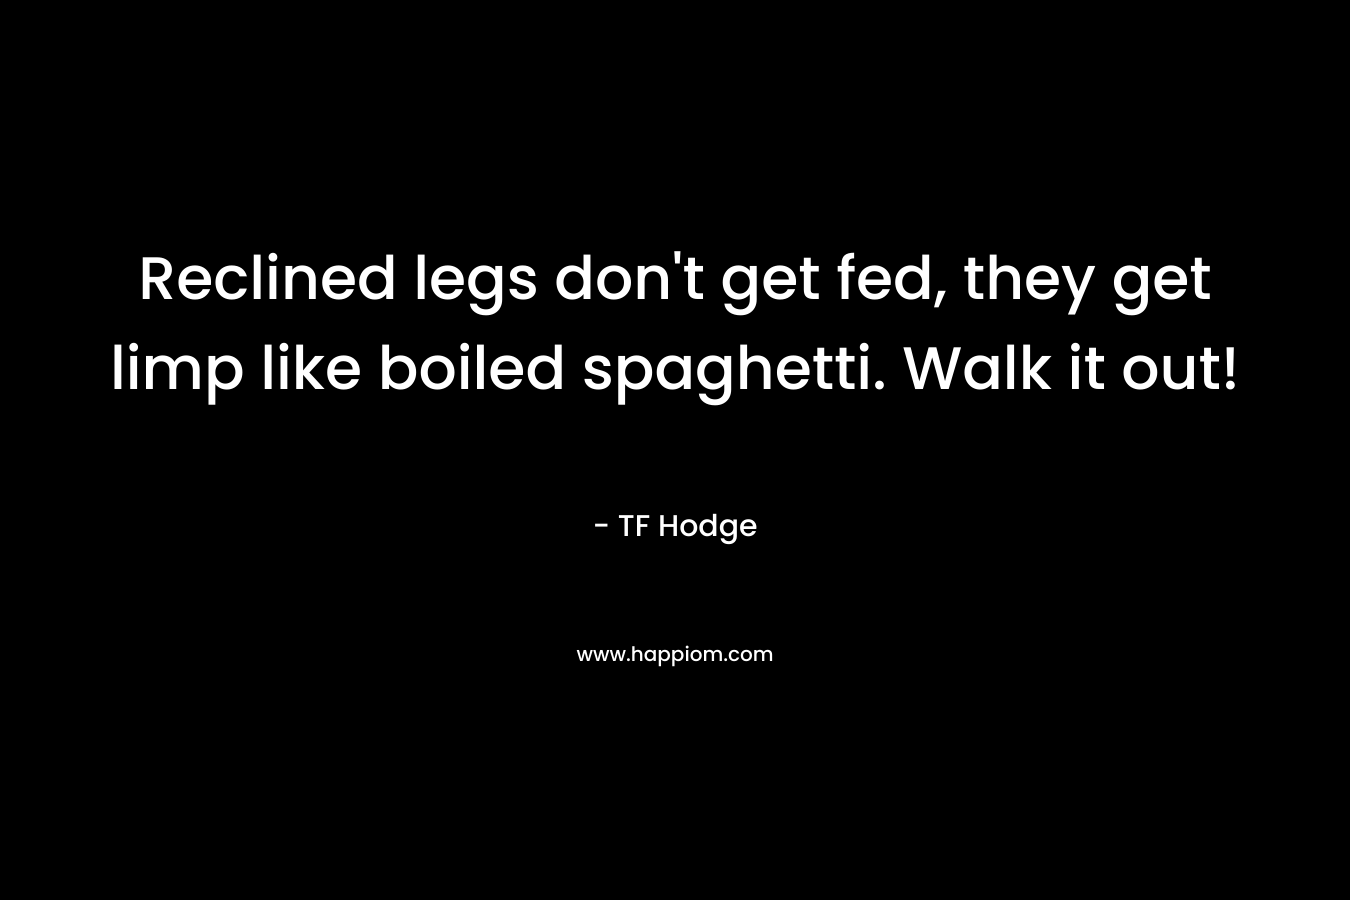 Reclined legs don’t get fed, they get limp like boiled spaghetti. Walk it out! – TF Hodge